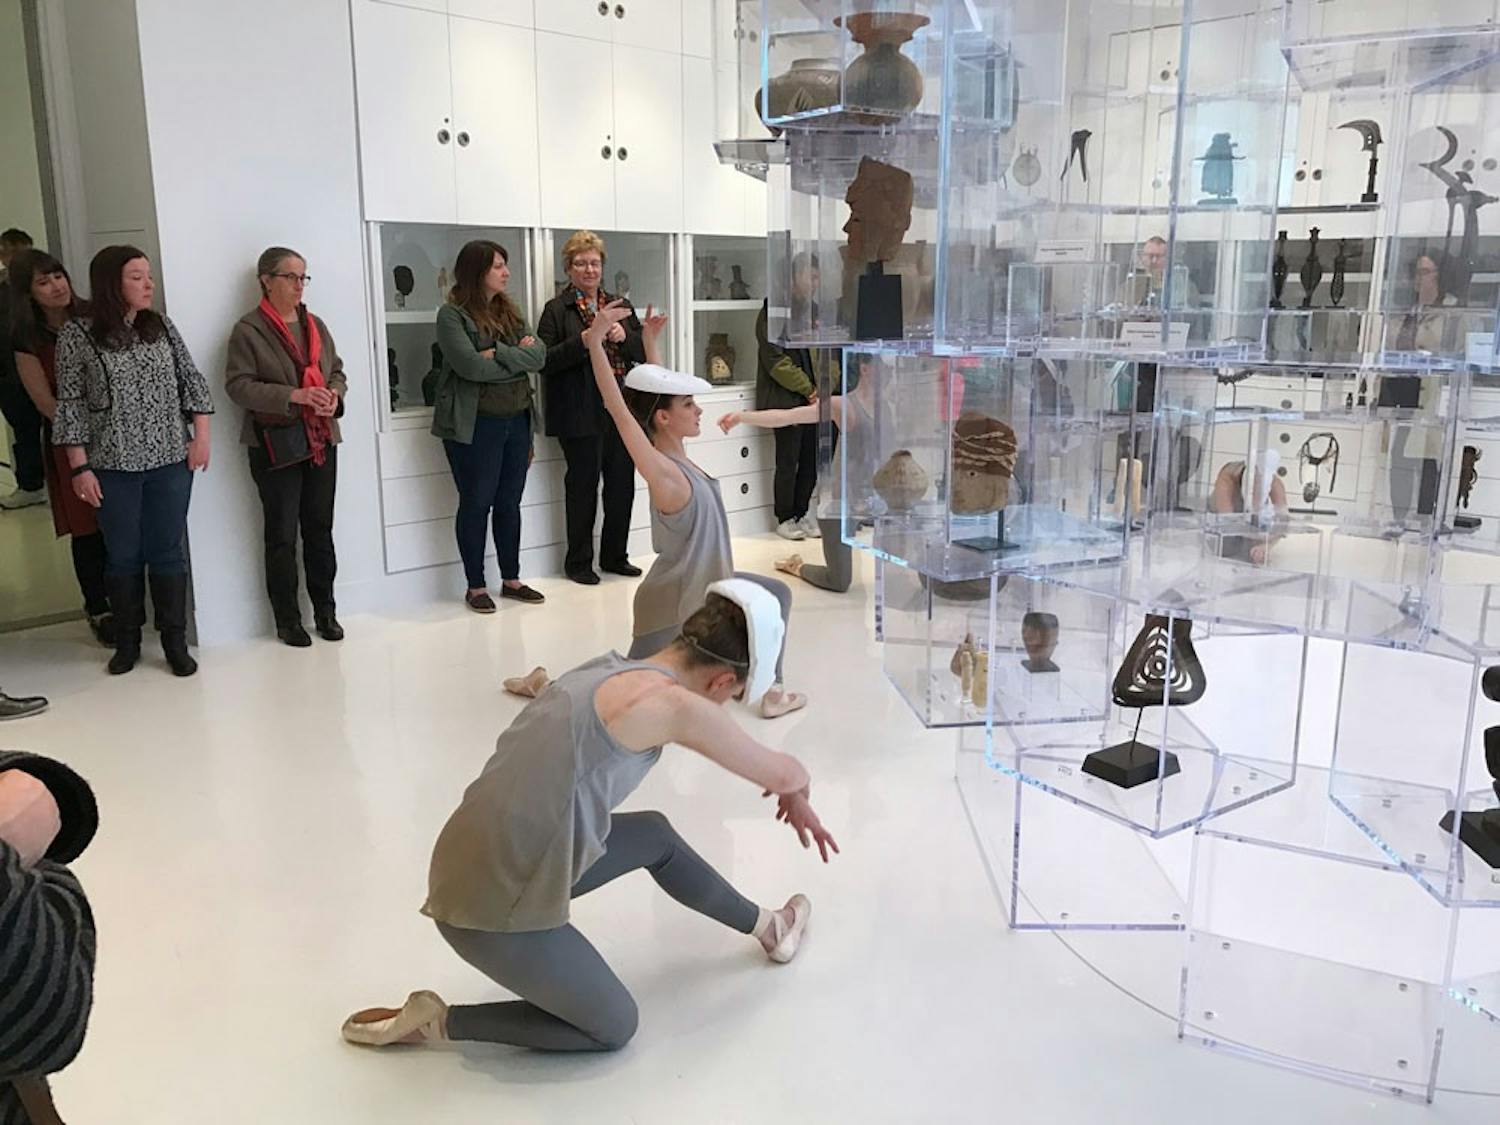 Senior dance major Maggie Hansen (left) and junior dance major Mary Pappagallo (right) perform during the opening night of&nbsp;"The Language of Objects" exhibition at UB's Anderson Gallery.&nbsp;